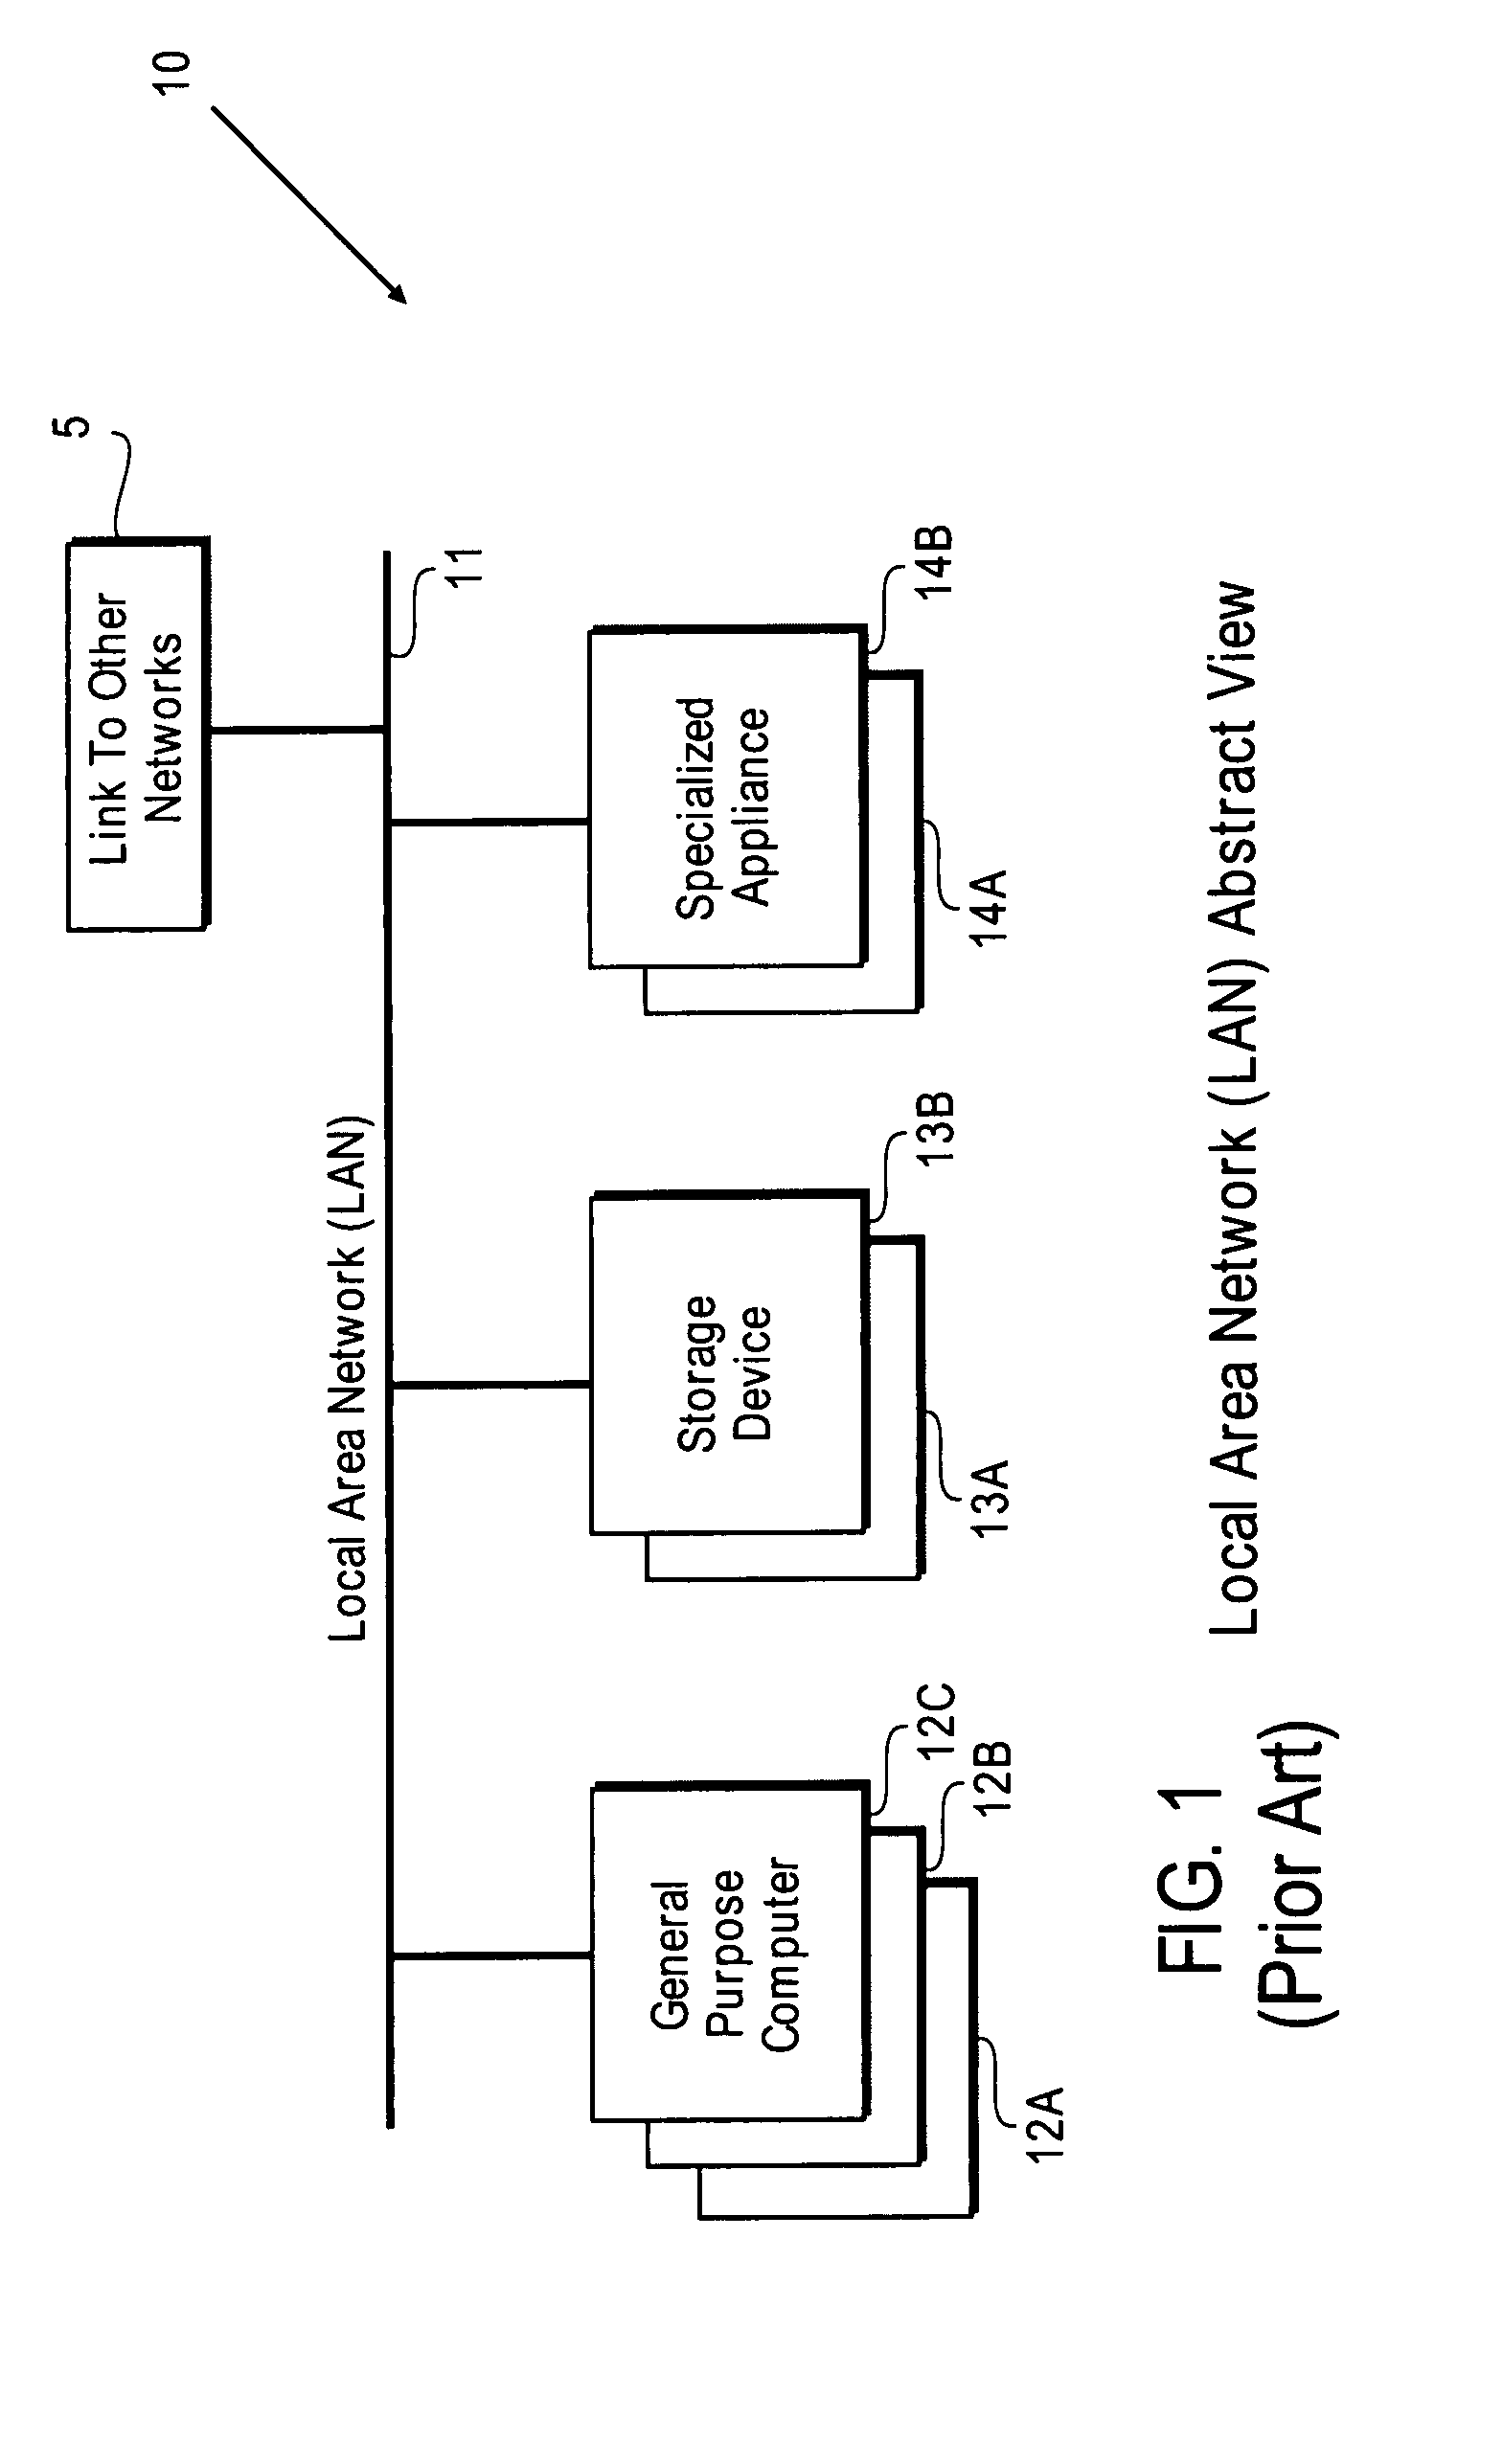 Methods and systems for processing network data